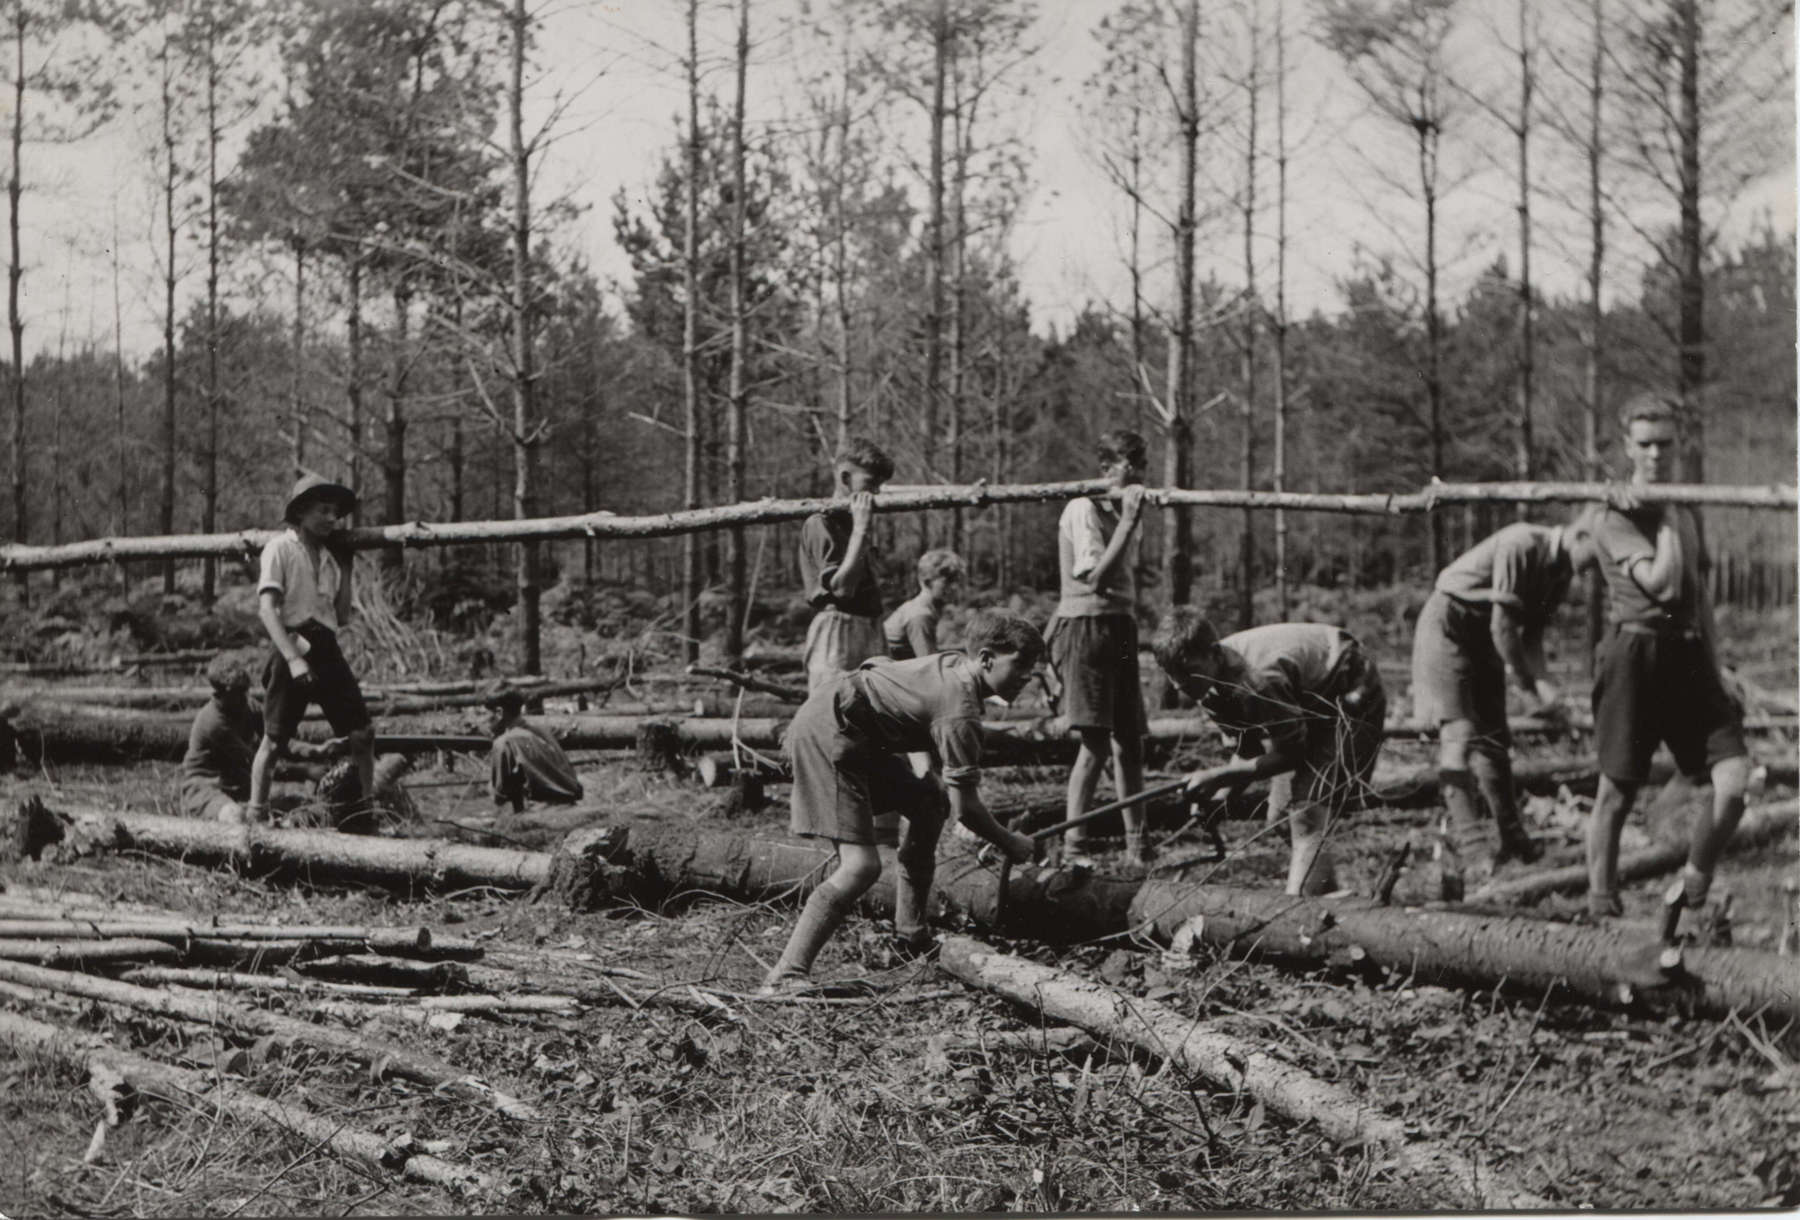 Black and white photo of a group of Scouts in a forest, carrying a long wooden log